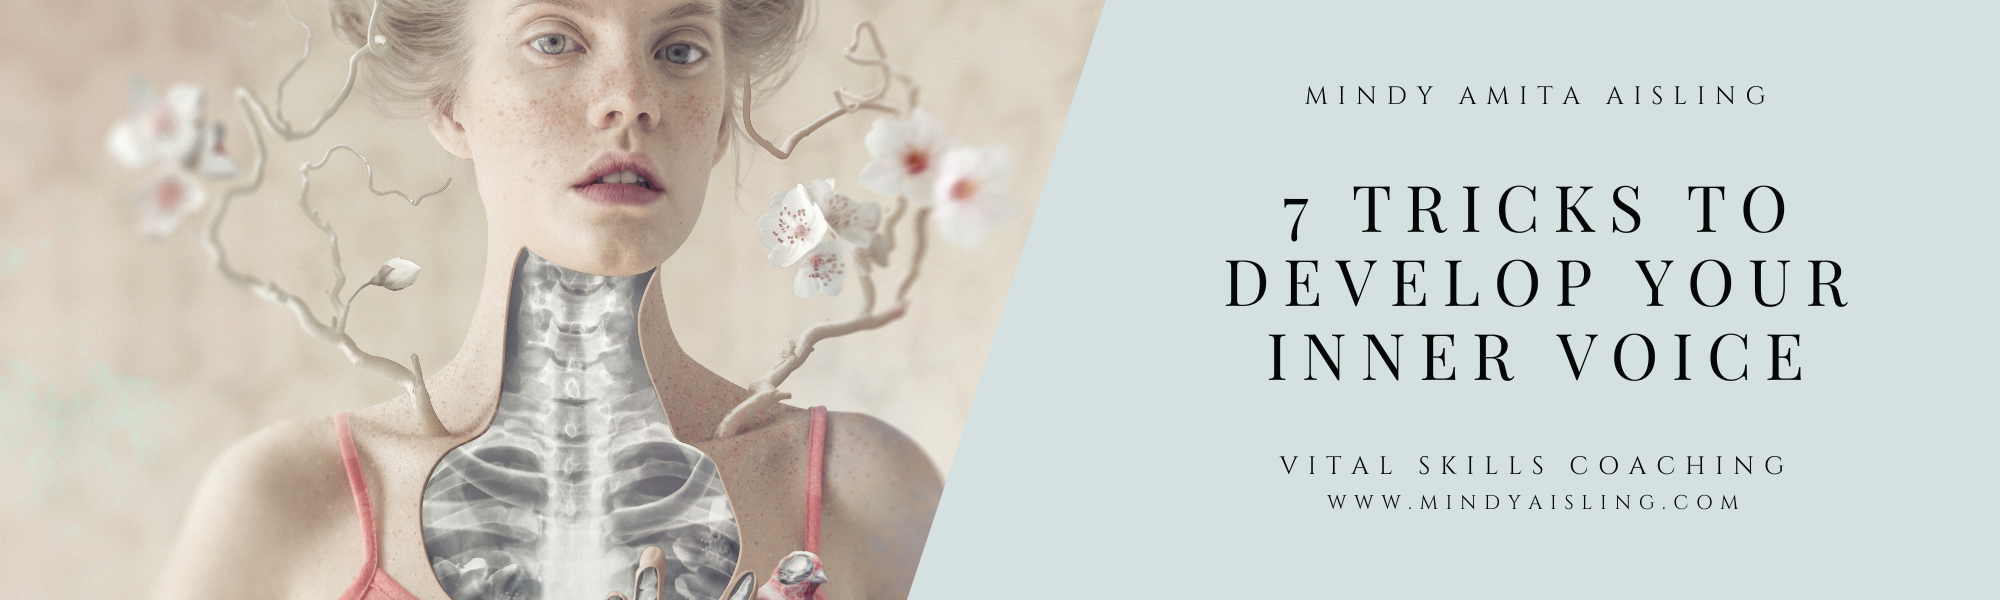 7 Tricks to Develop Your Inner Voice